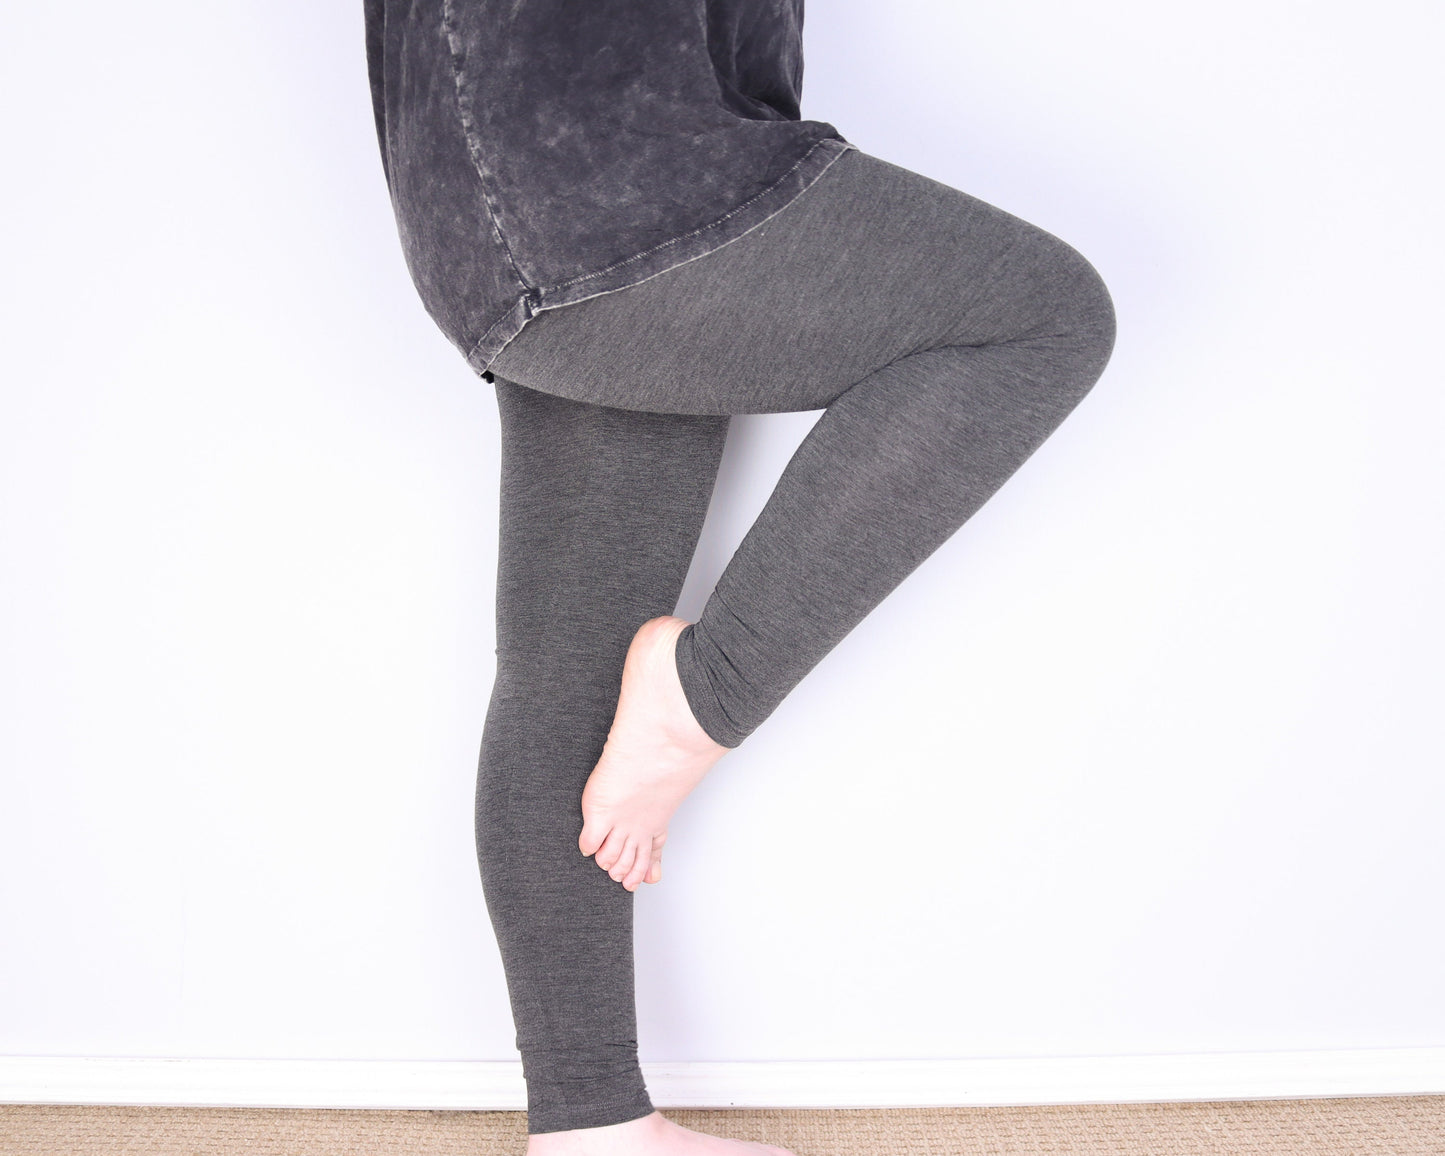 SMALLER FIT Thick Plain Leggings - Heather Grey - Bare Canvas